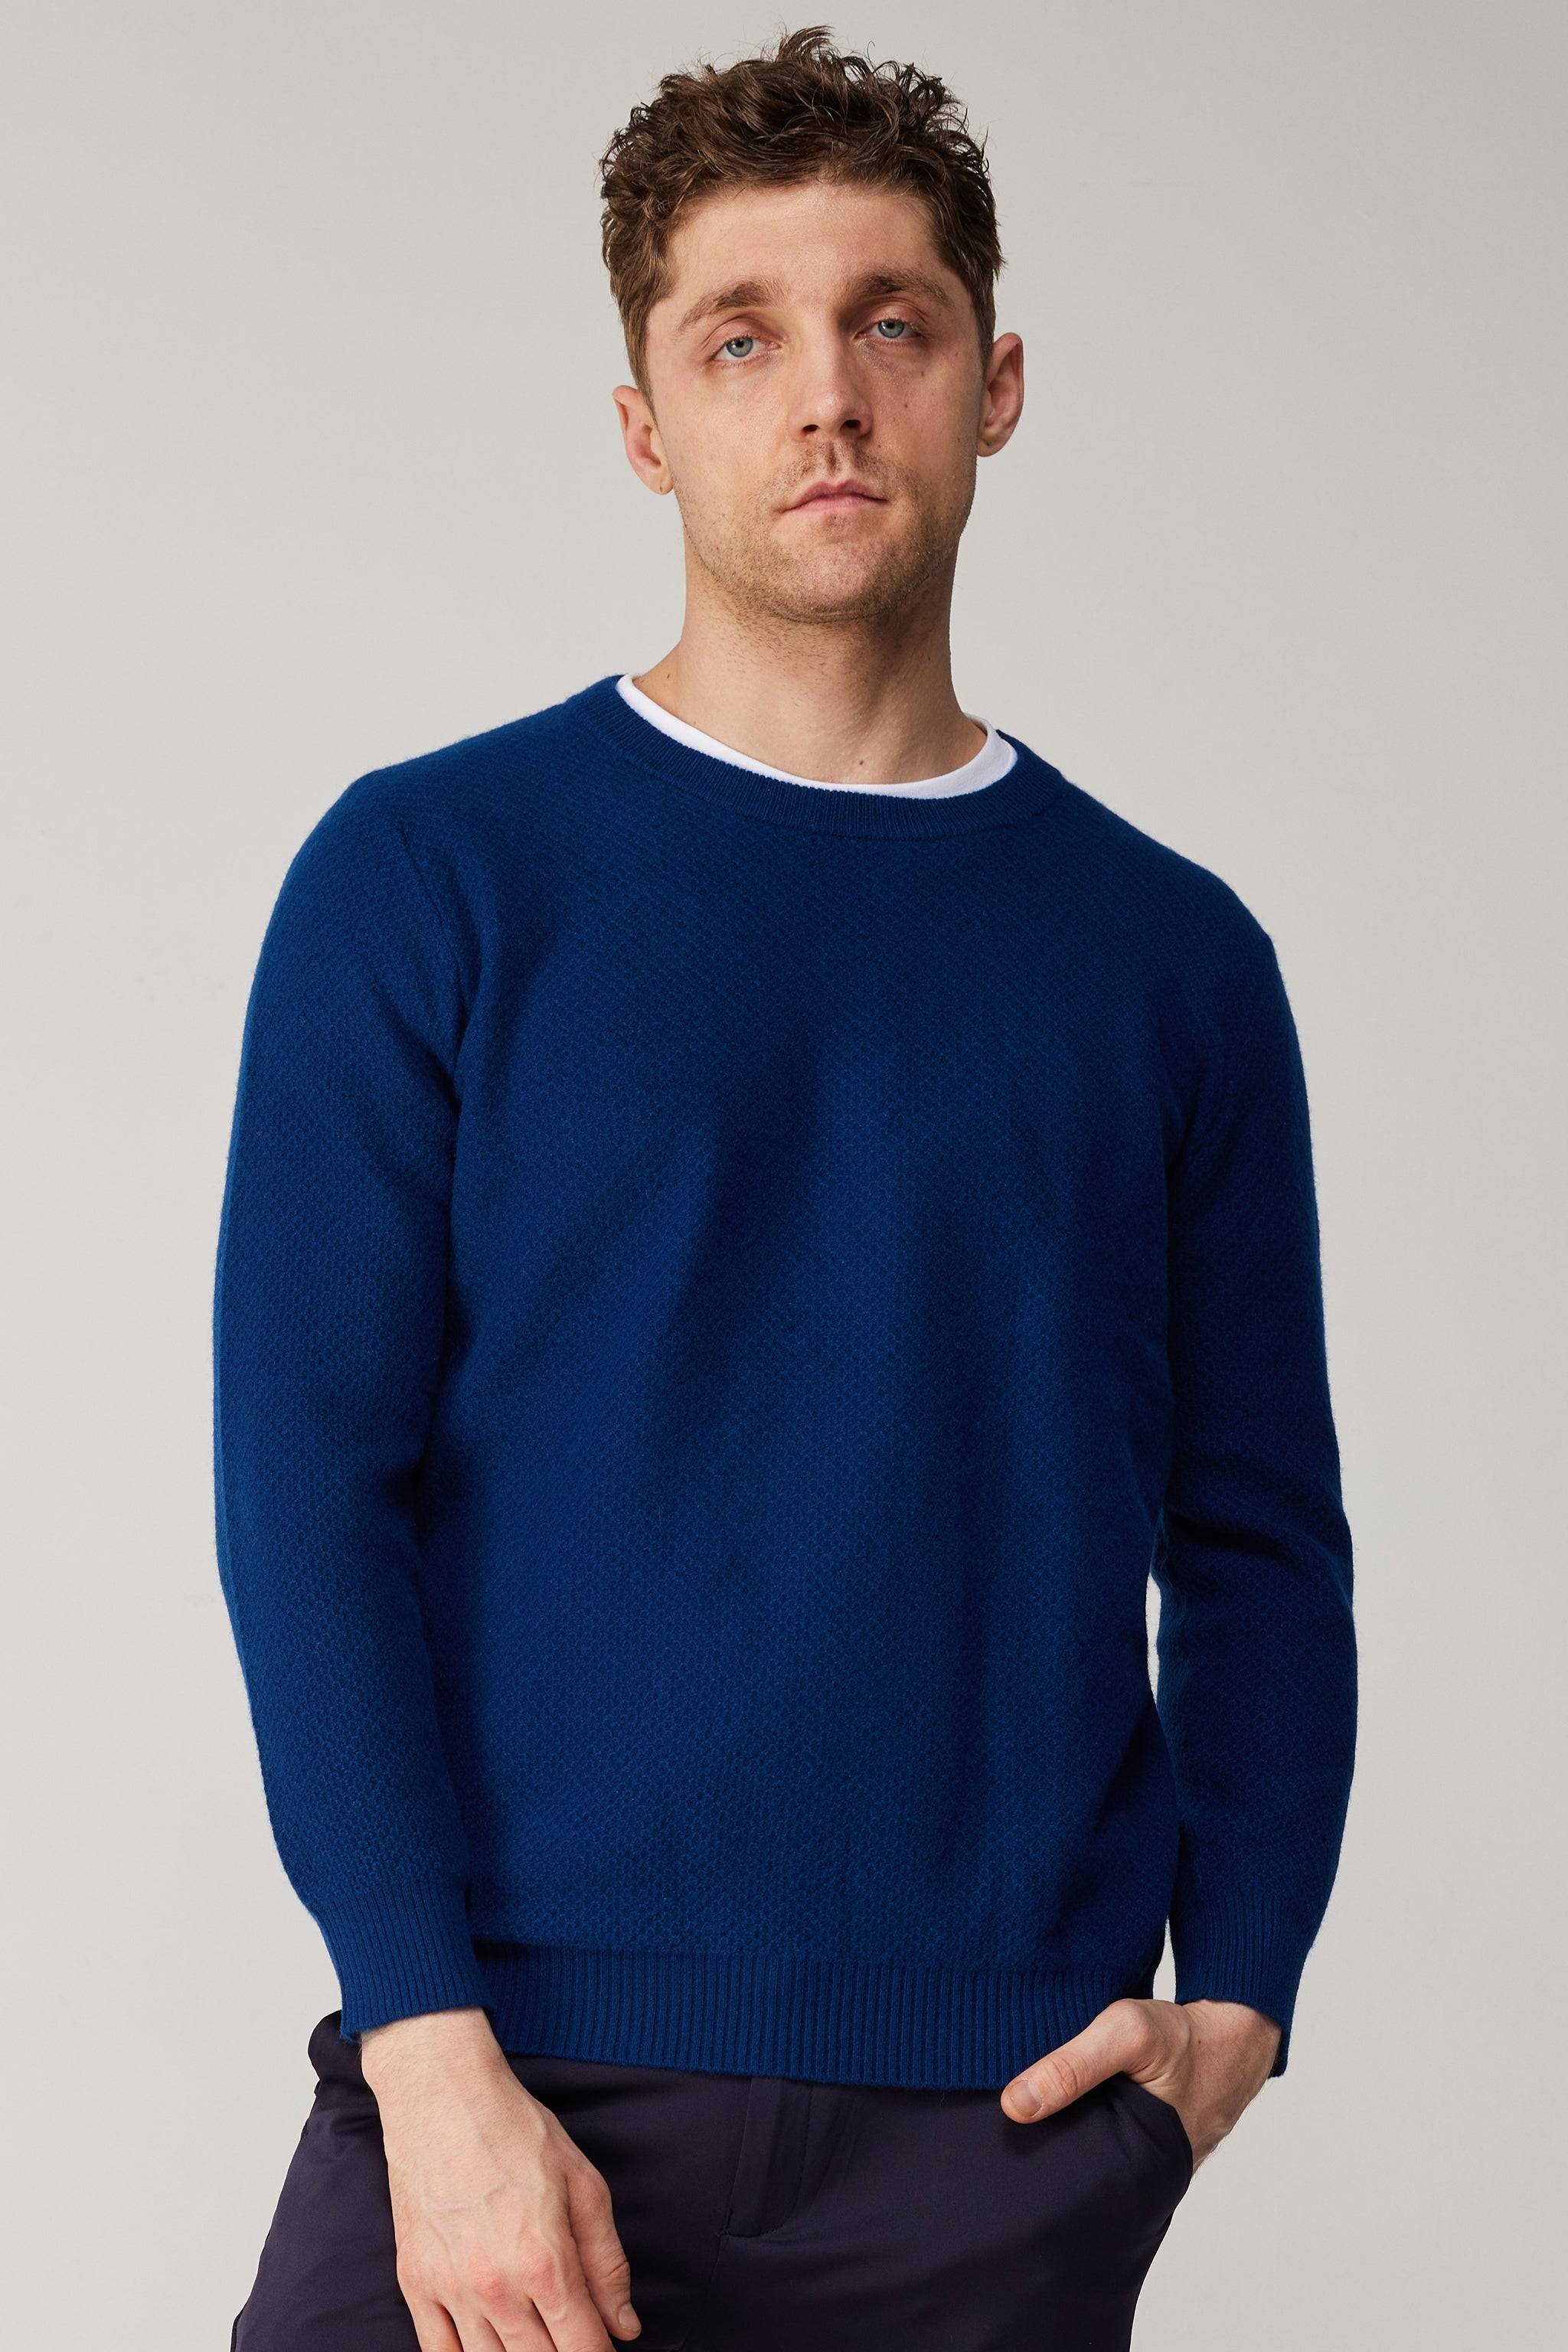 a man in a blue sweater is posing for a picture